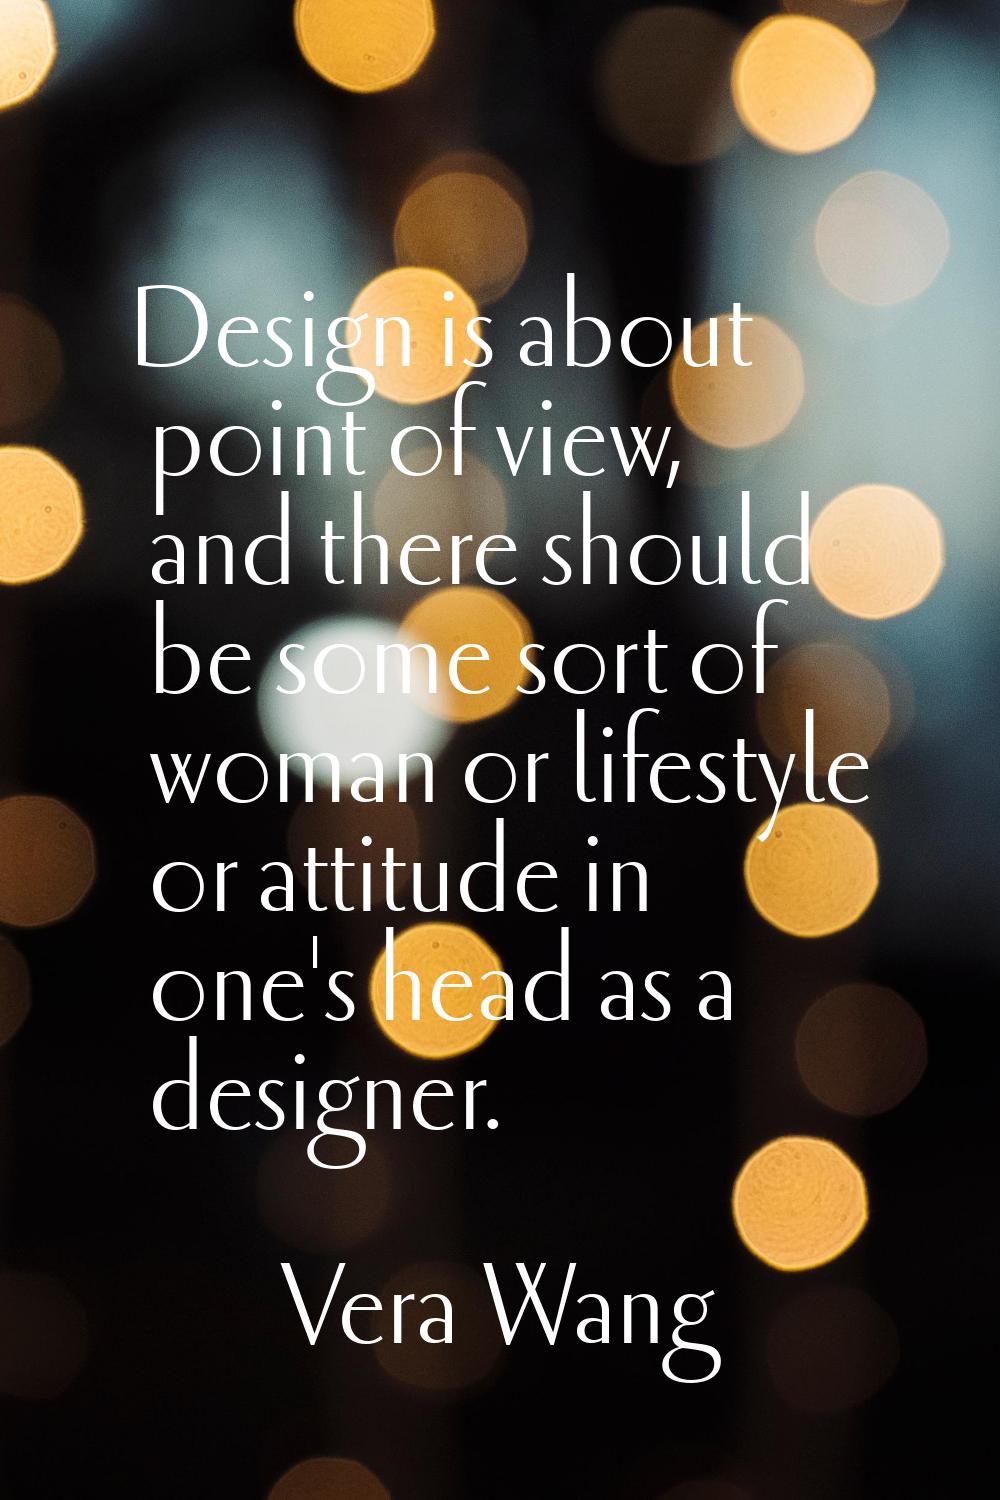 Design is about point of view, and there should be some sort of woman or lifestyle or attitude in o